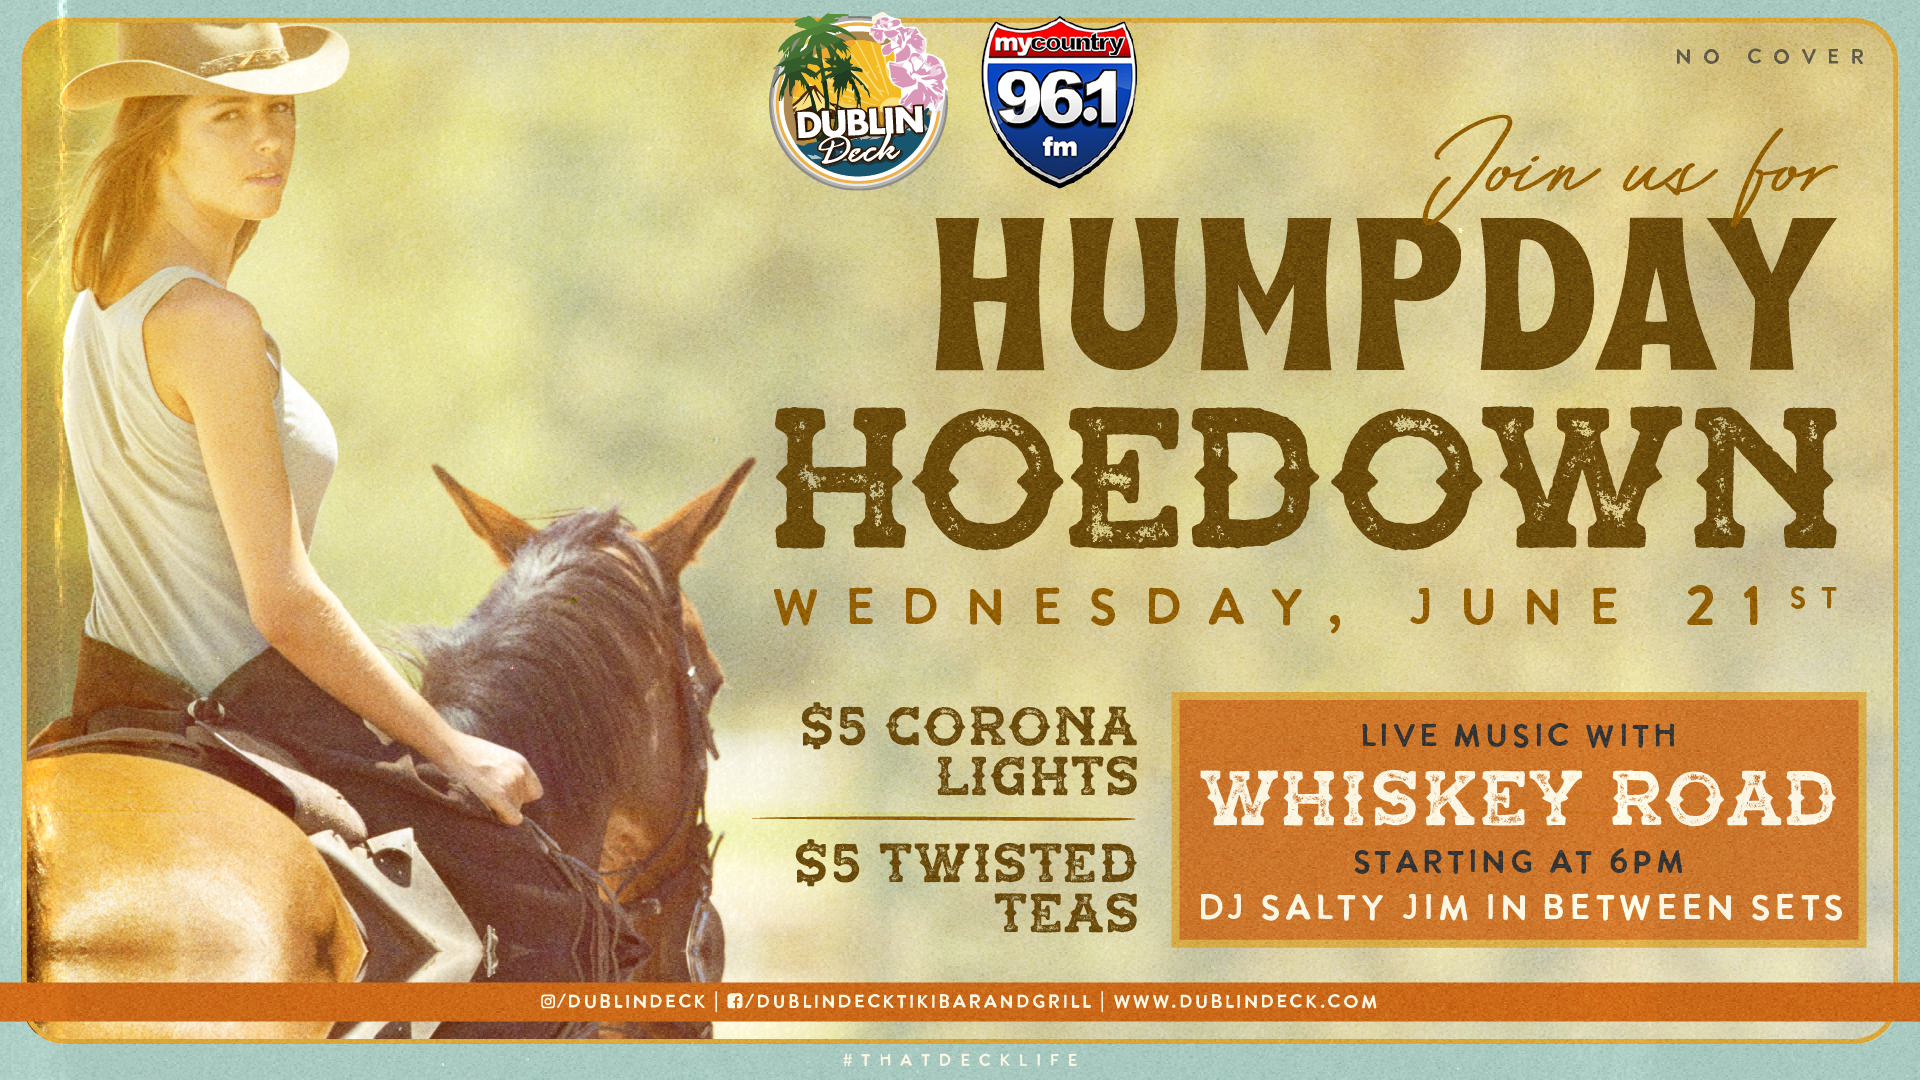 Get your cowboy boots ready for Humpday Hoedown with Whiskey Road! Music begins at 6PM